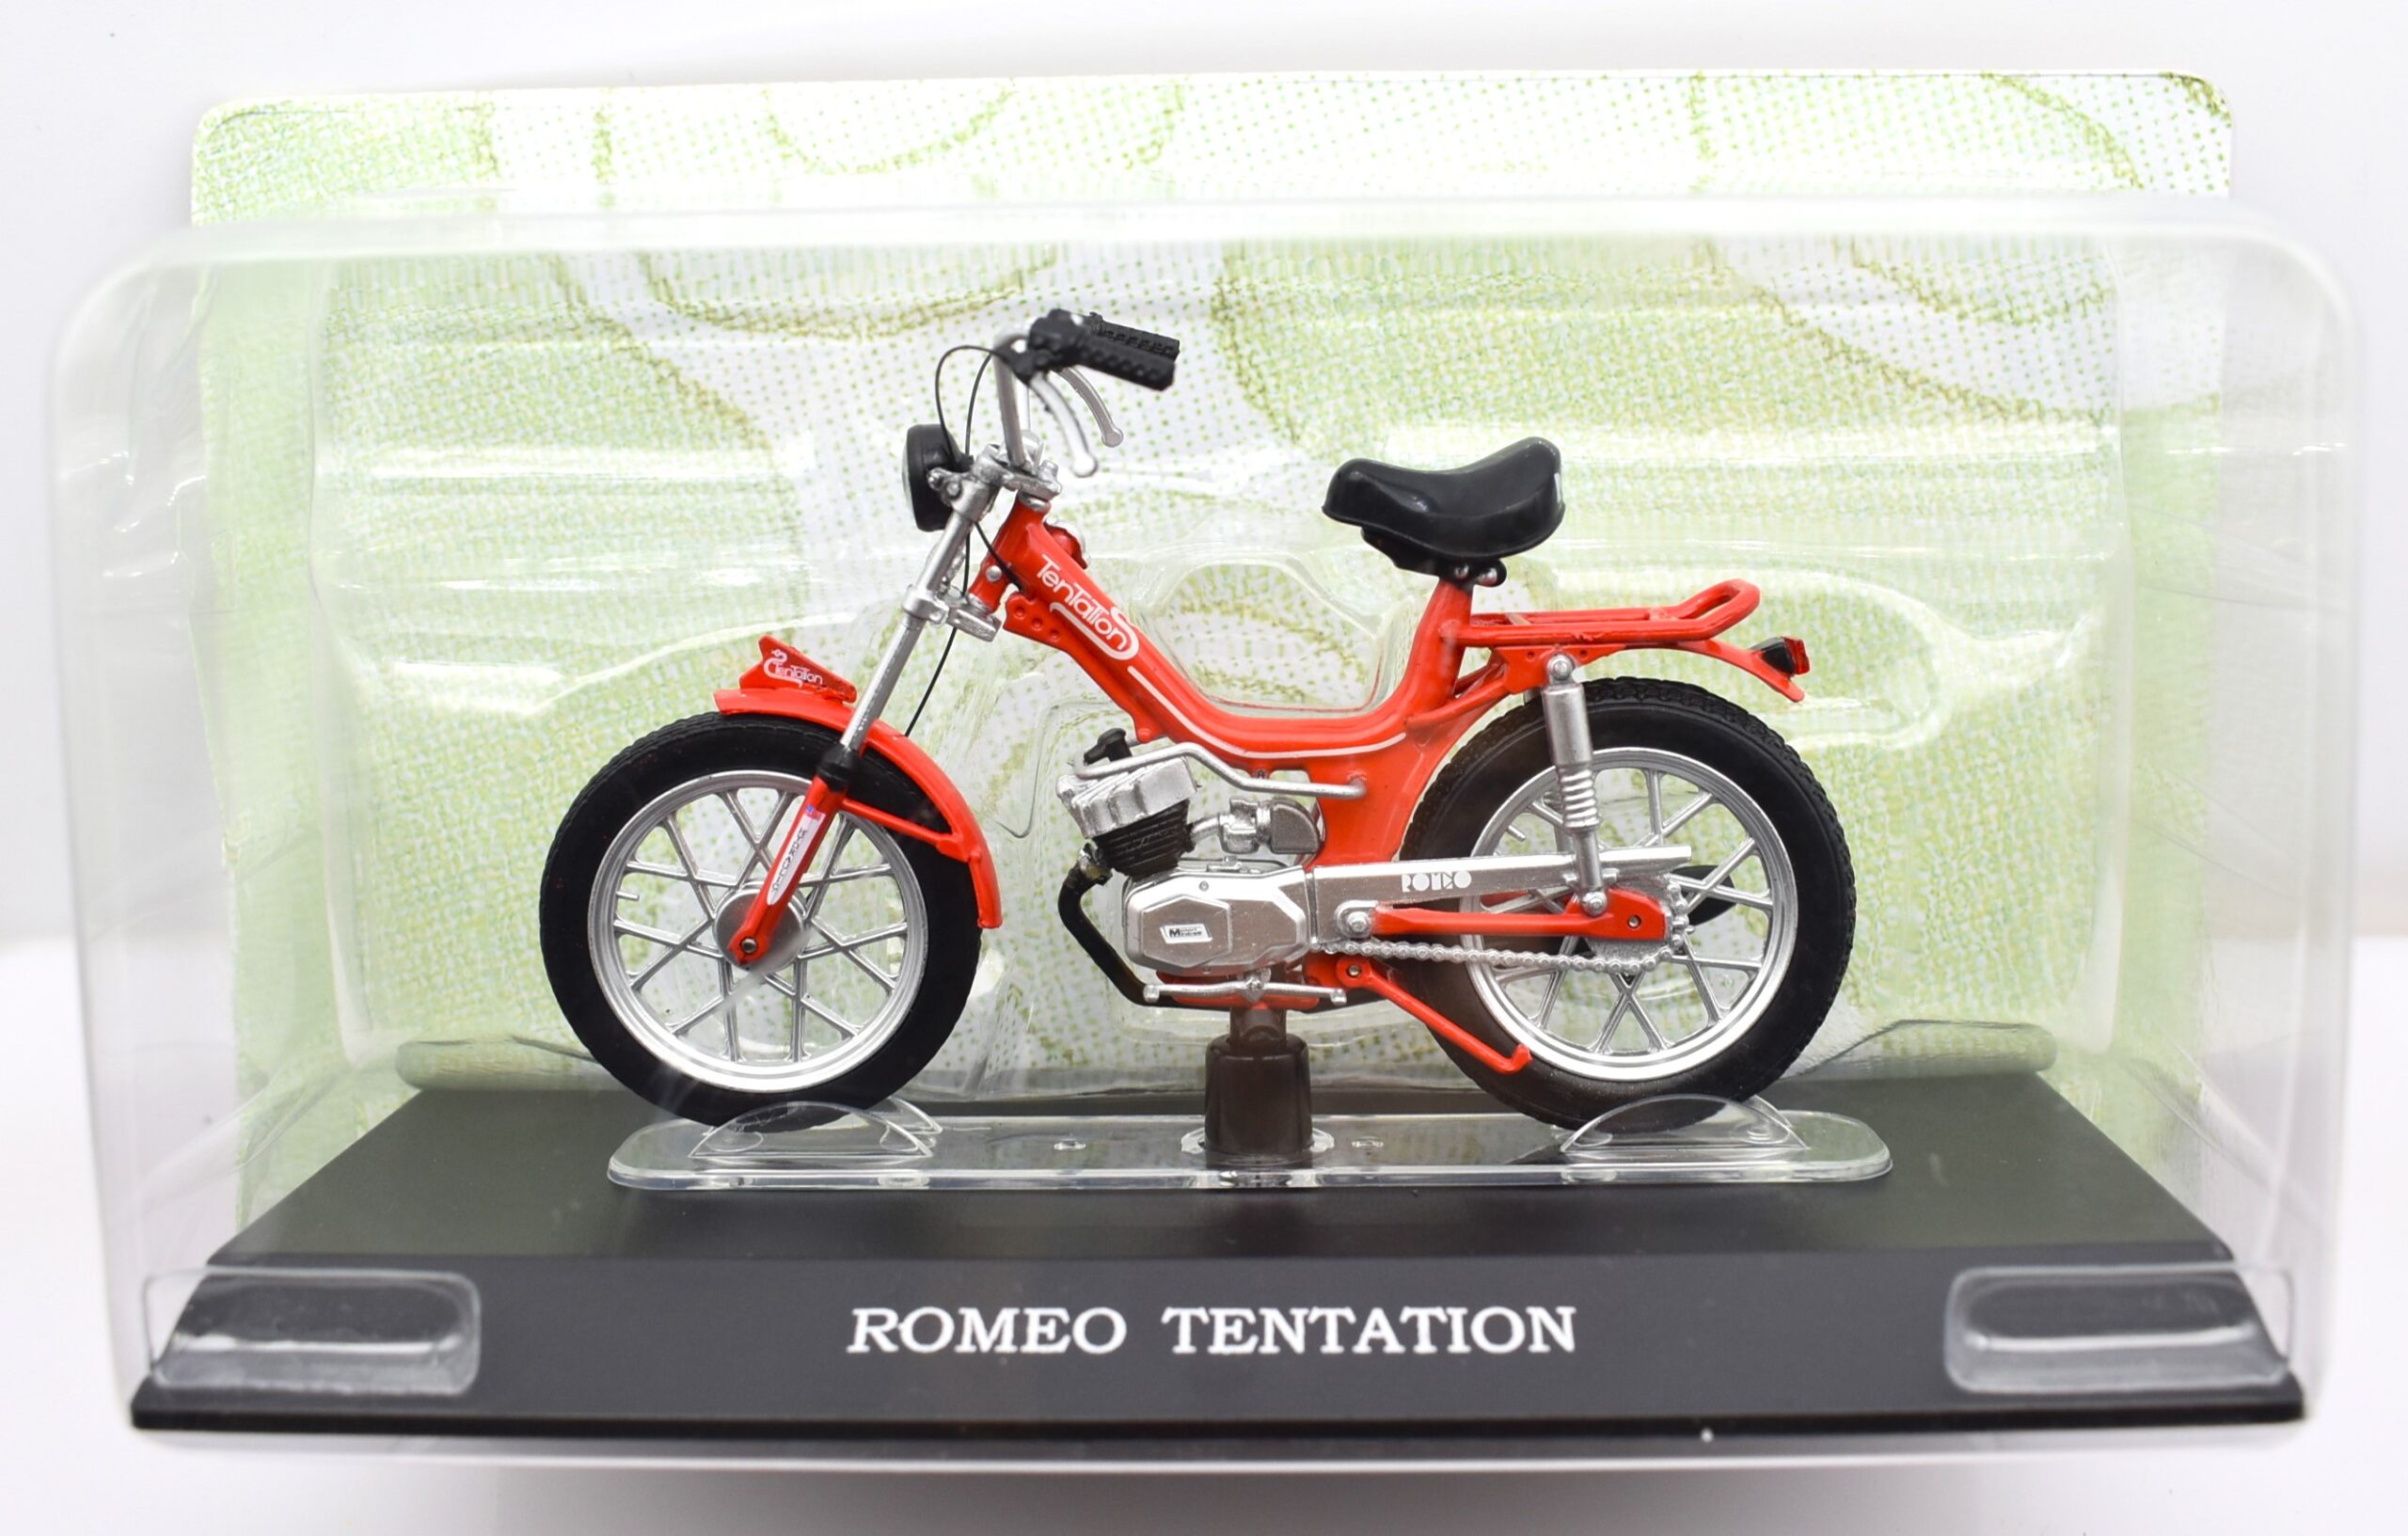 1:18 scale moped motorcyclecollection Romeo Tentation scooterdiecast